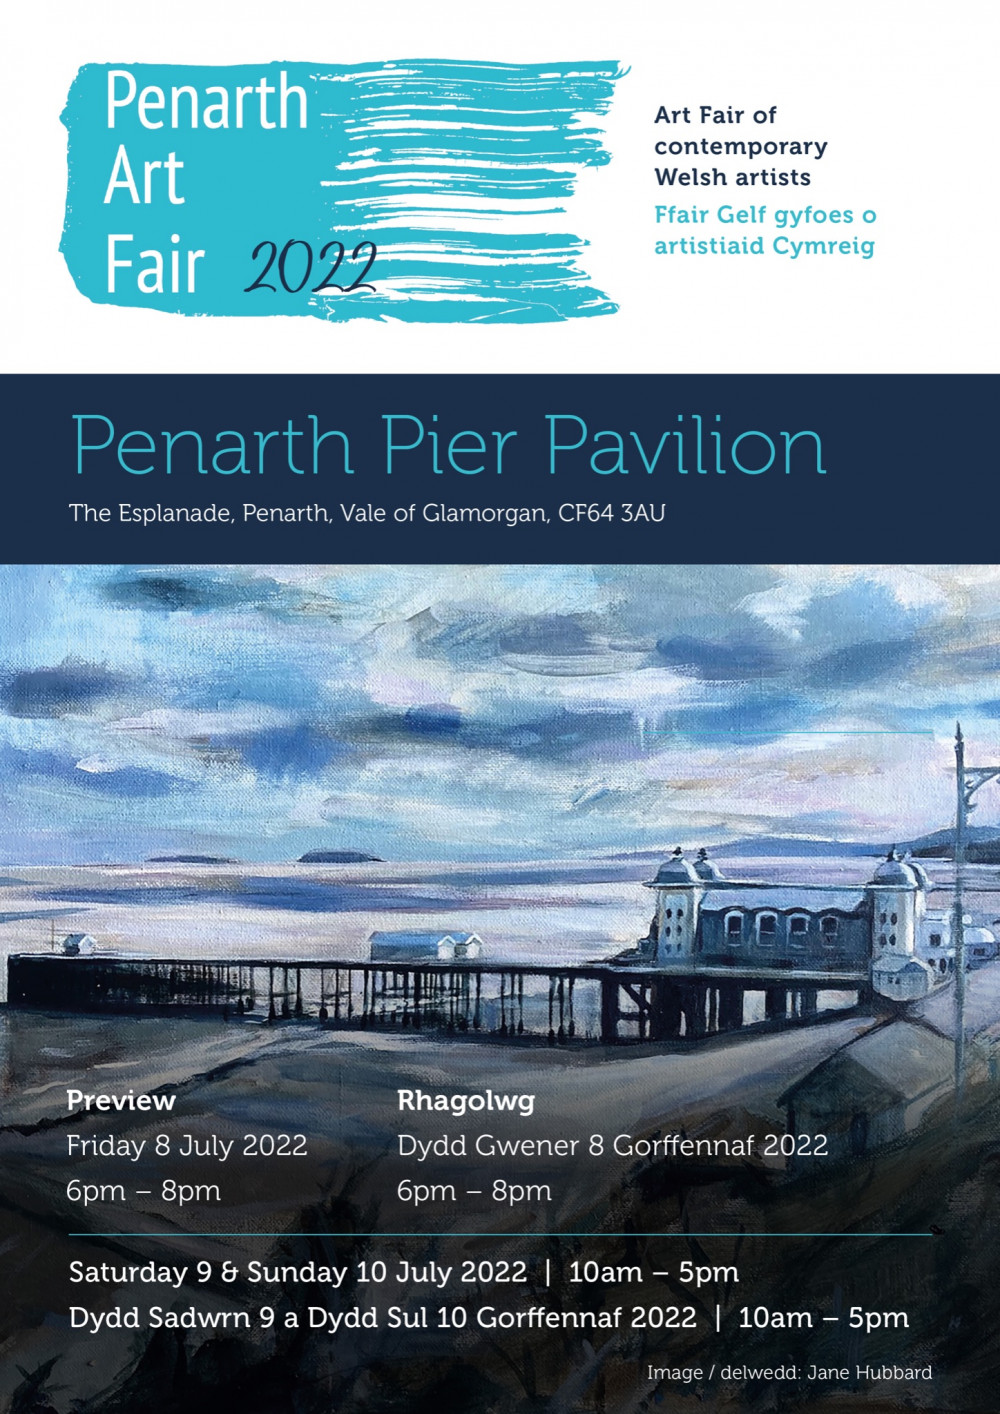 Come along and support all the local professional artists and galleries taking part. (Image credit: Jane Hubbard)